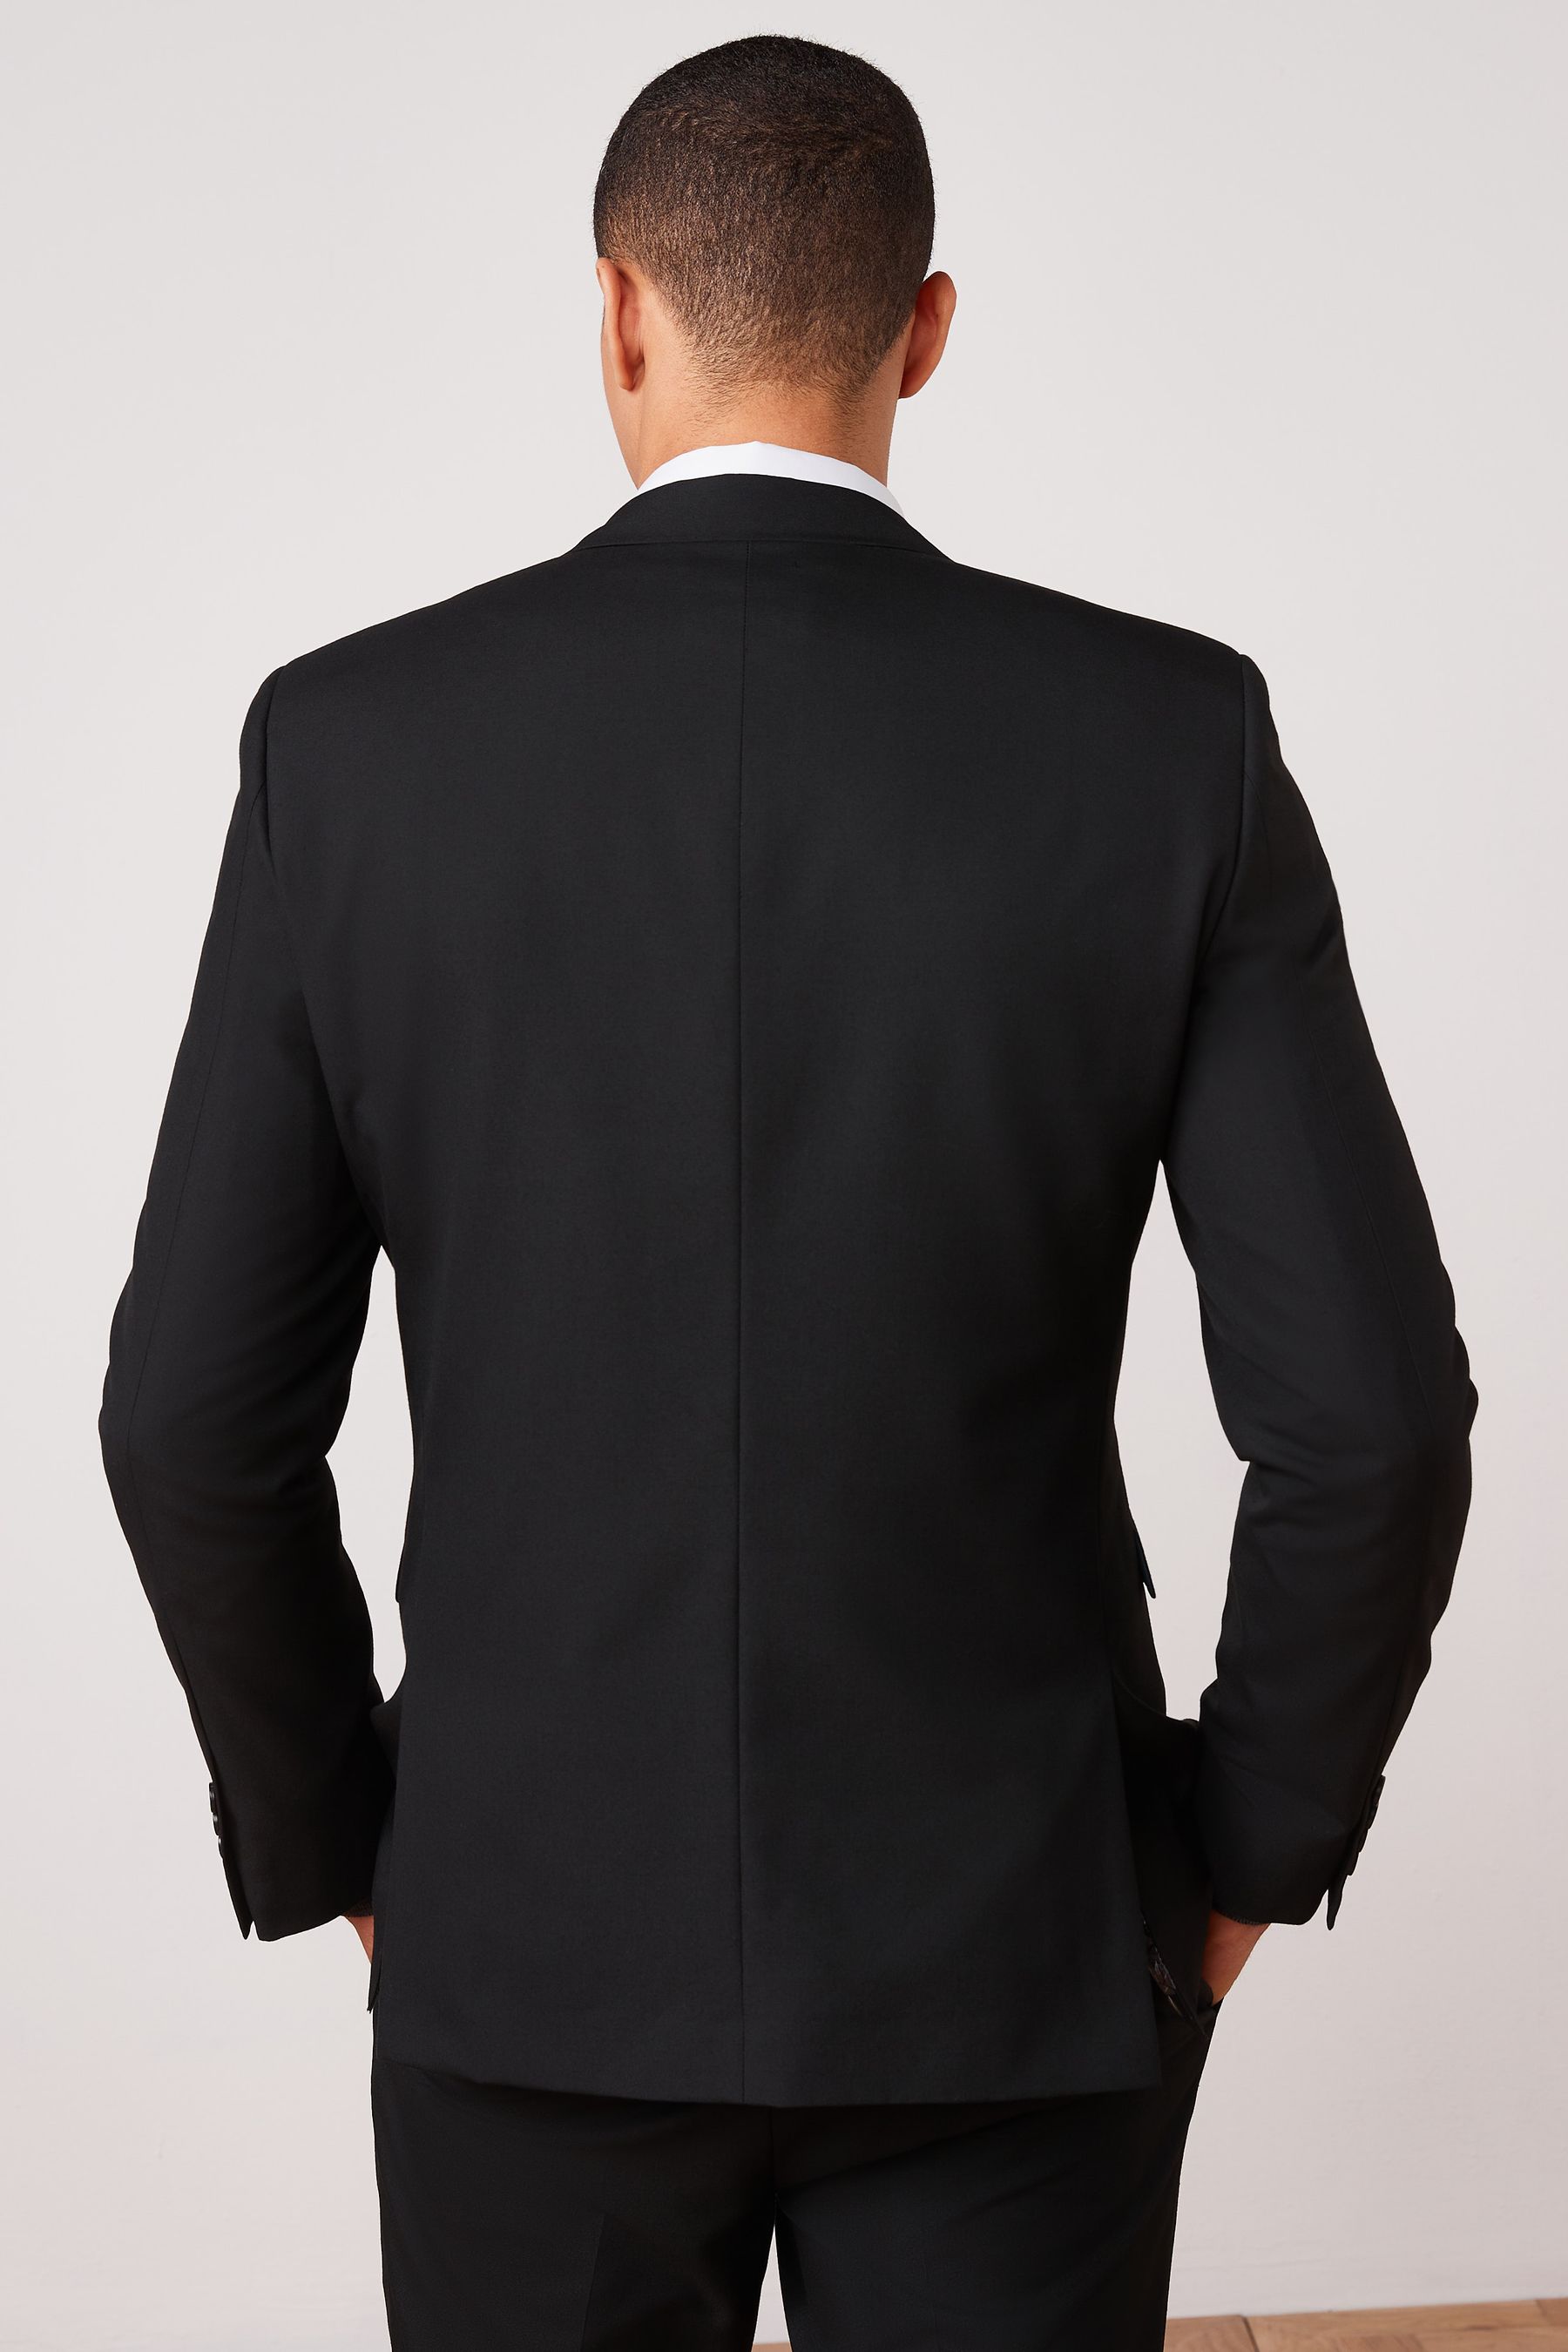 Buy Black Slim Two Button Suit Jacket from the Next UK online shop